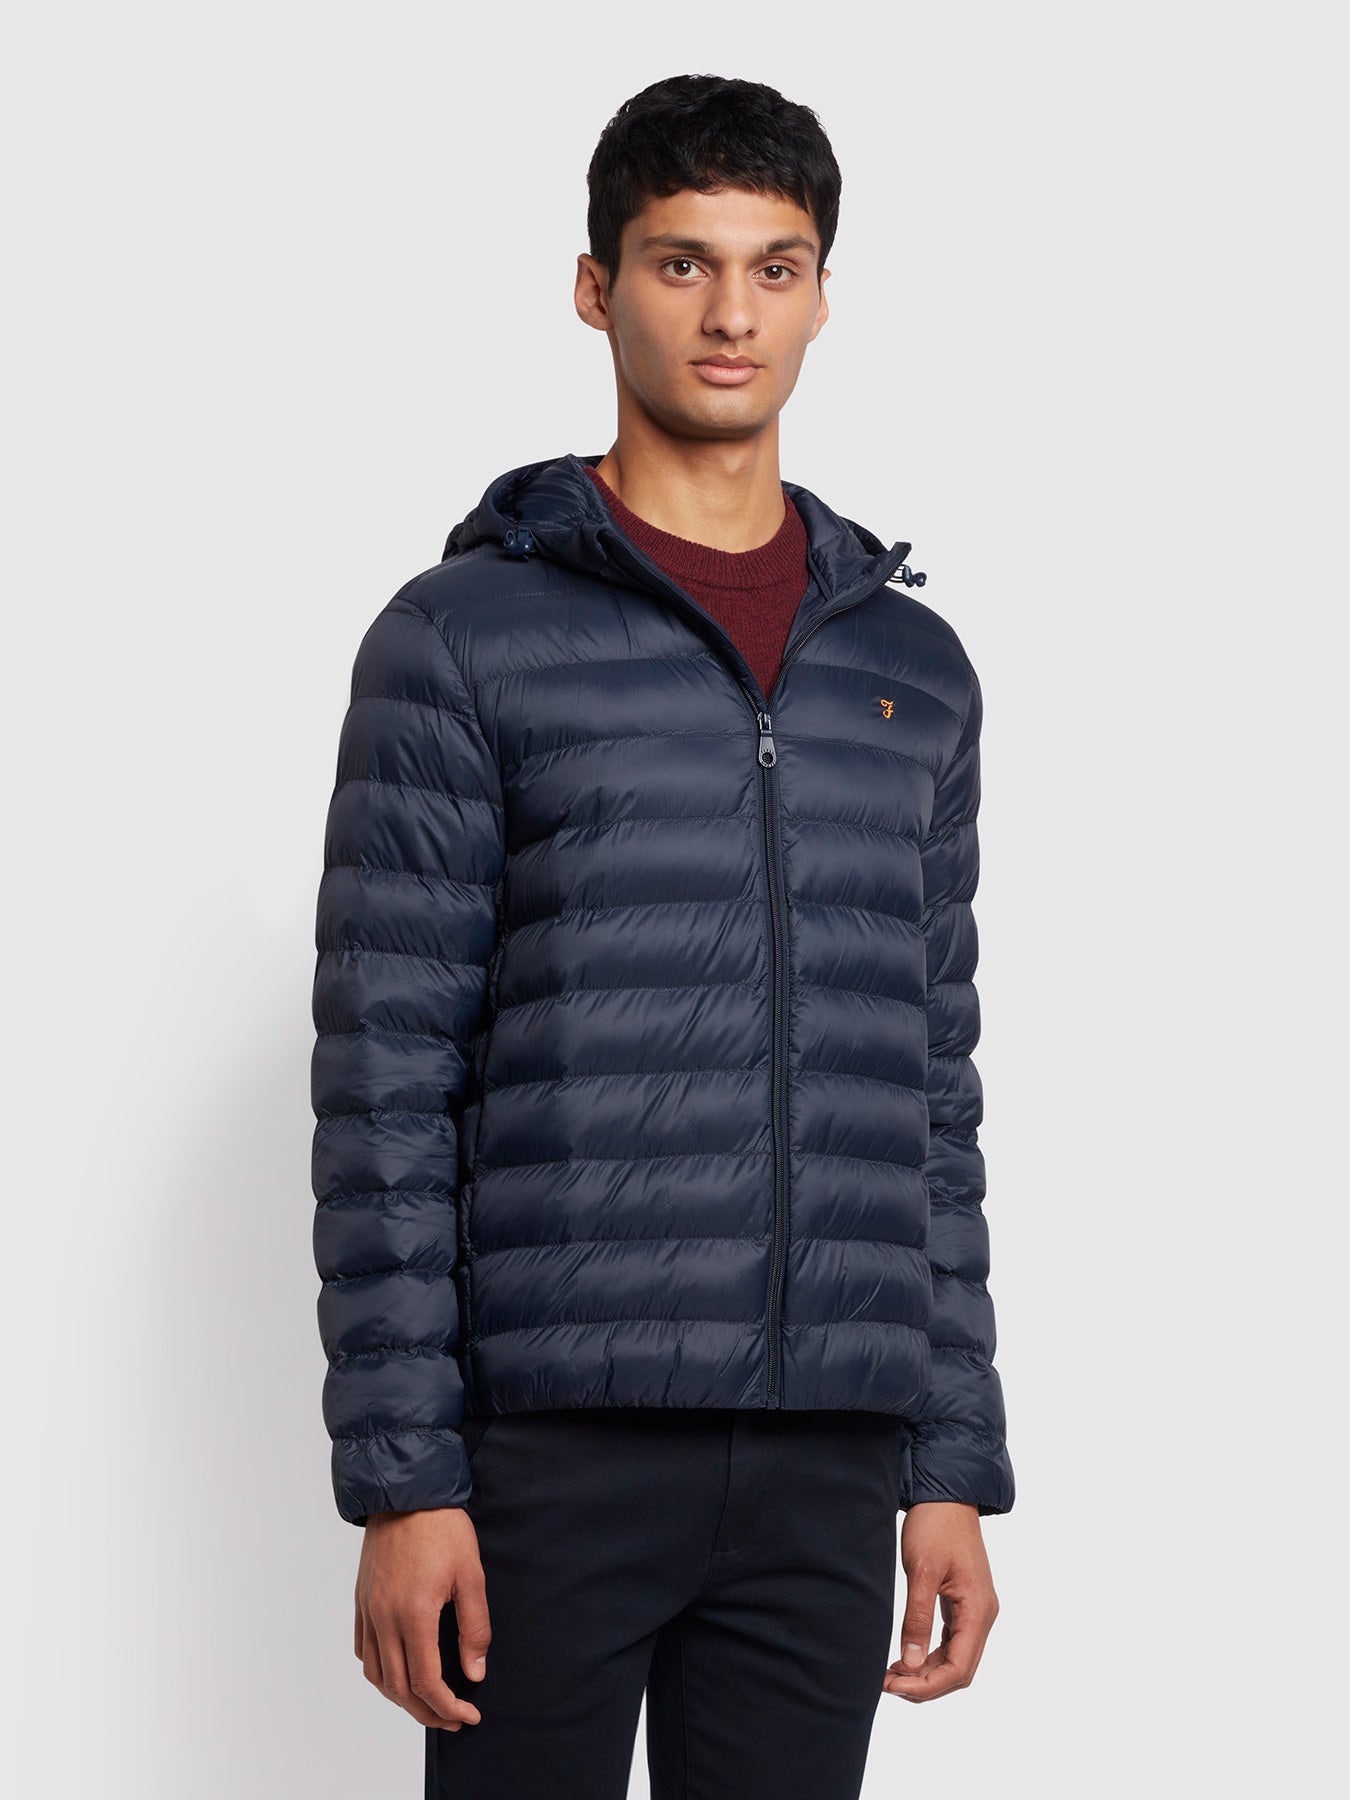 Farah Strickland Wadded Puffer Jacket In Blue